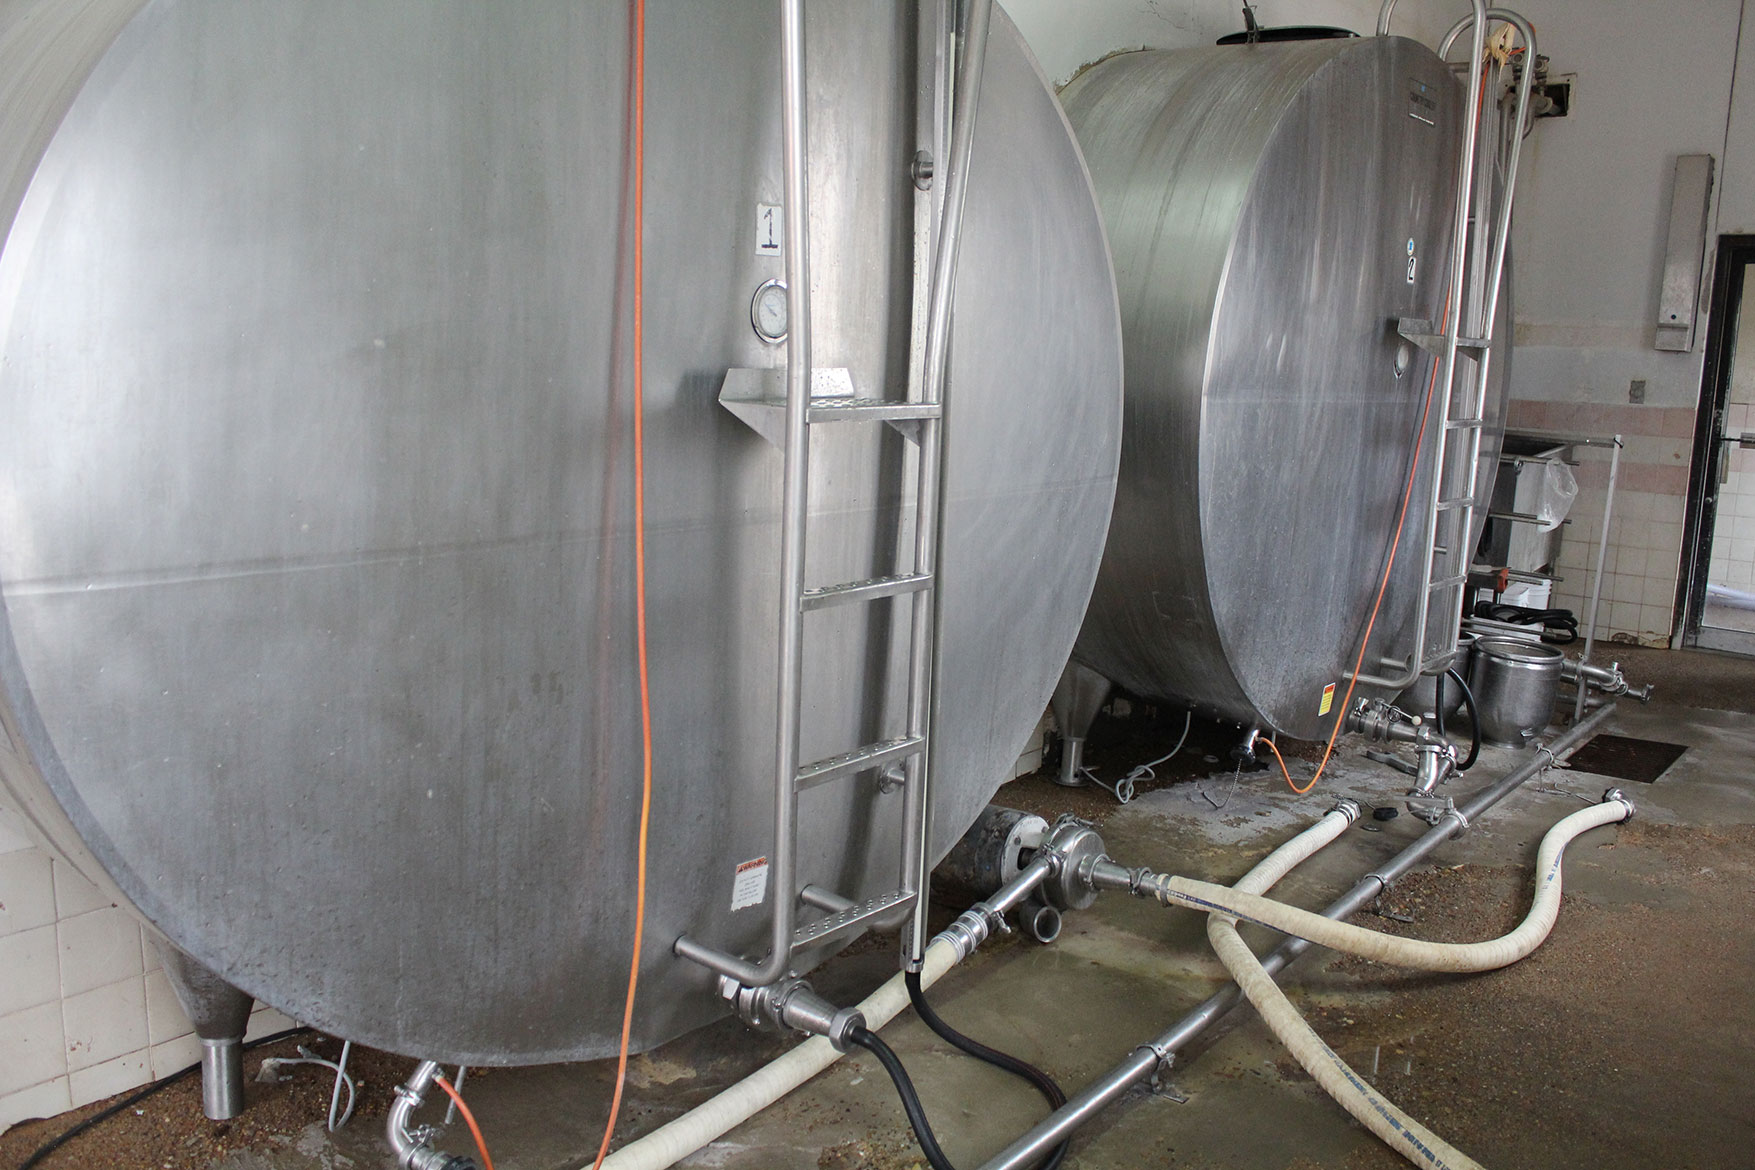 These stainless steel tanks store the milk until a truck comes to pick it up for processing.